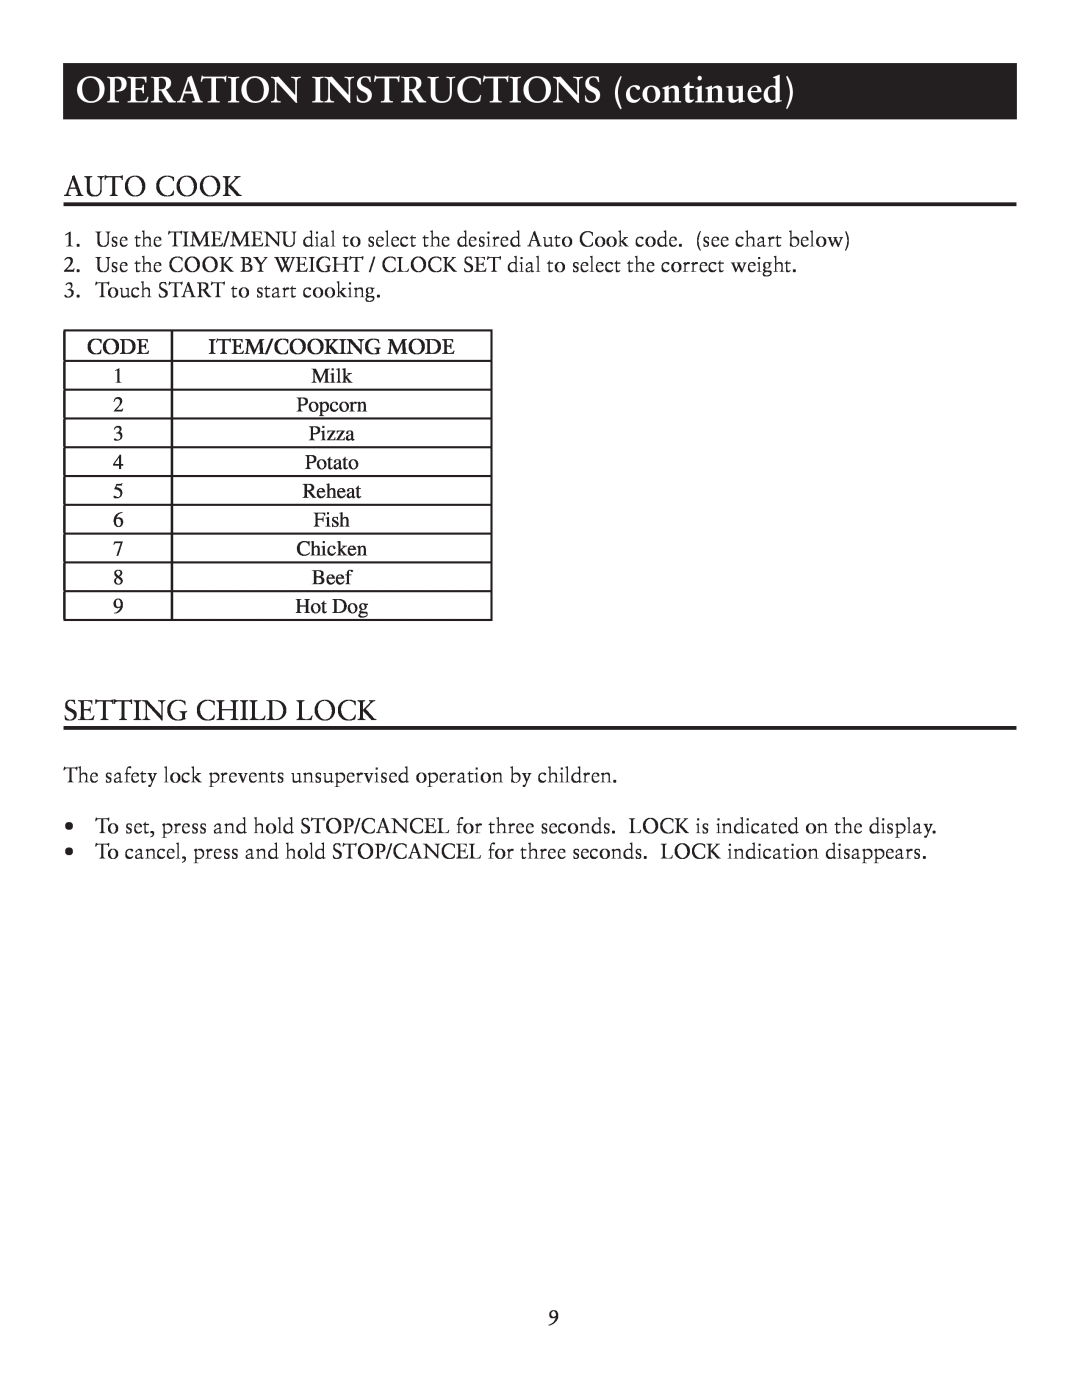 Oster OTM1101GBS user manual Auto Cook, Setting Child Lock, OPERATION INSTRUCTIONS continued, Code, Item/Cooking Mode 